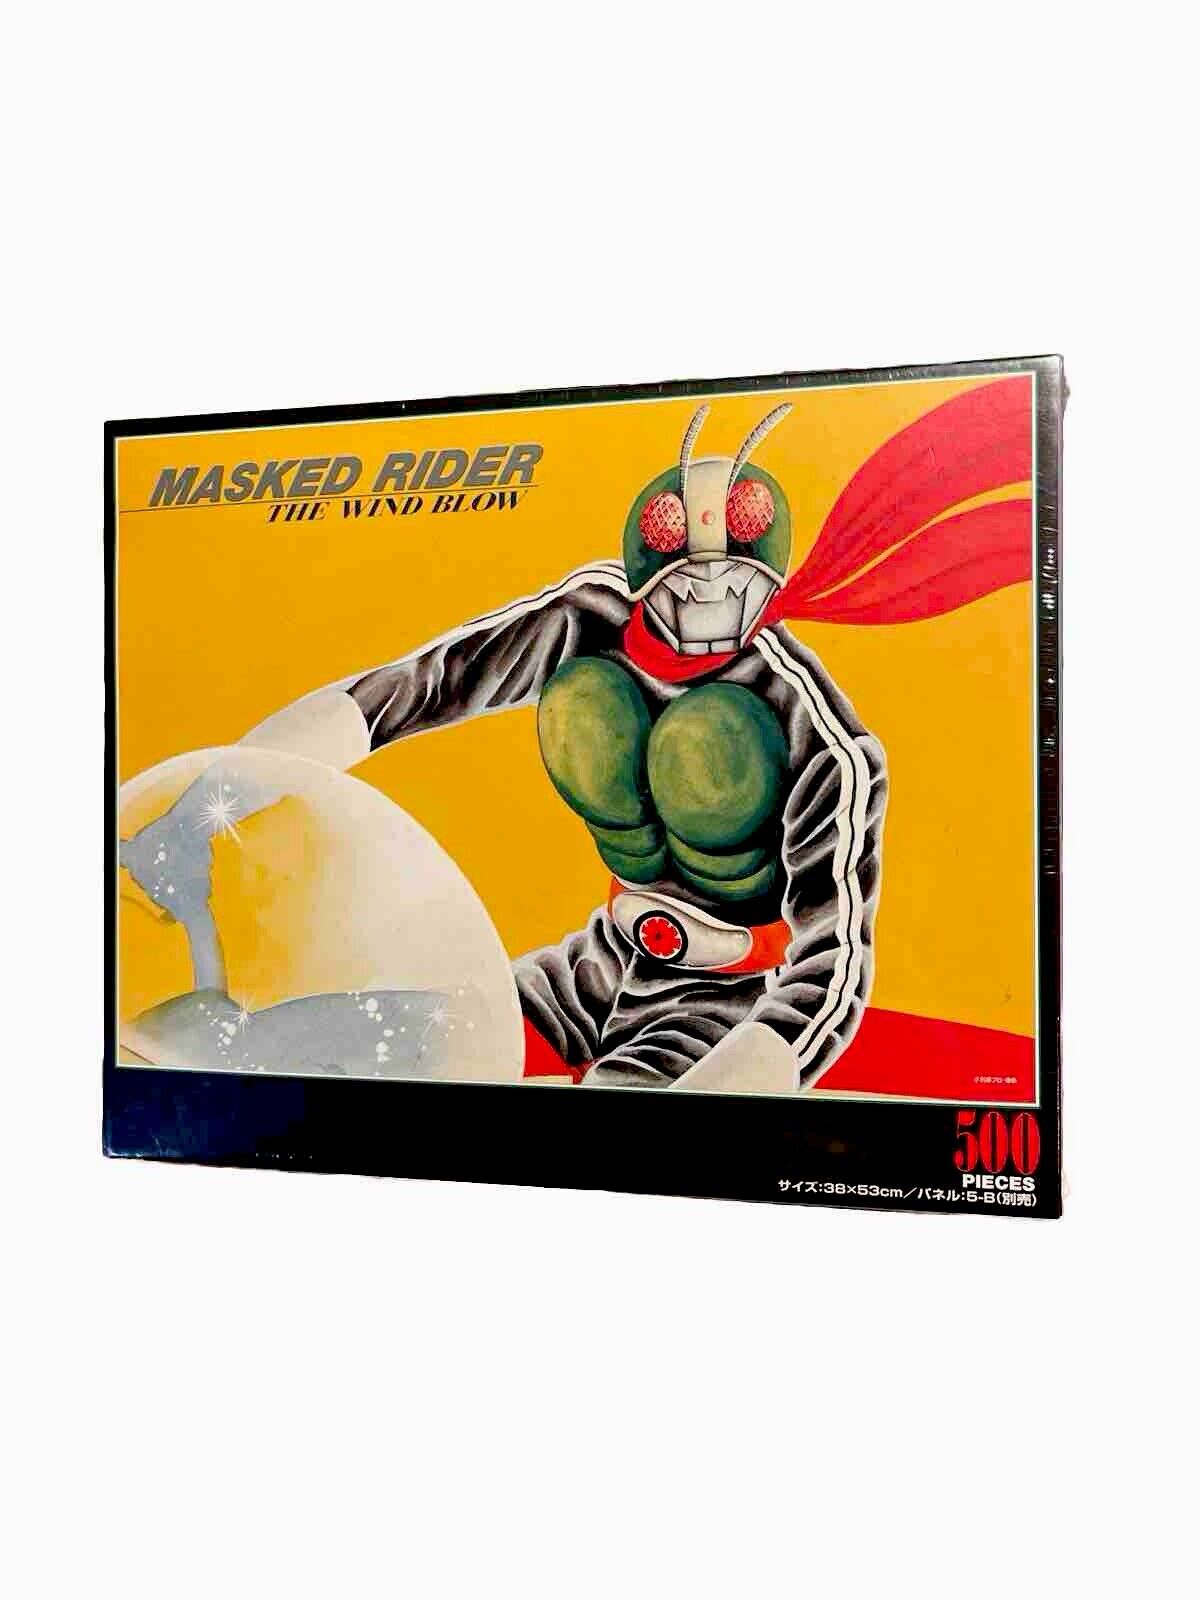 Extremely Rare Vintage Kamen Rider The Wind Blows 500 Piece Puzzle